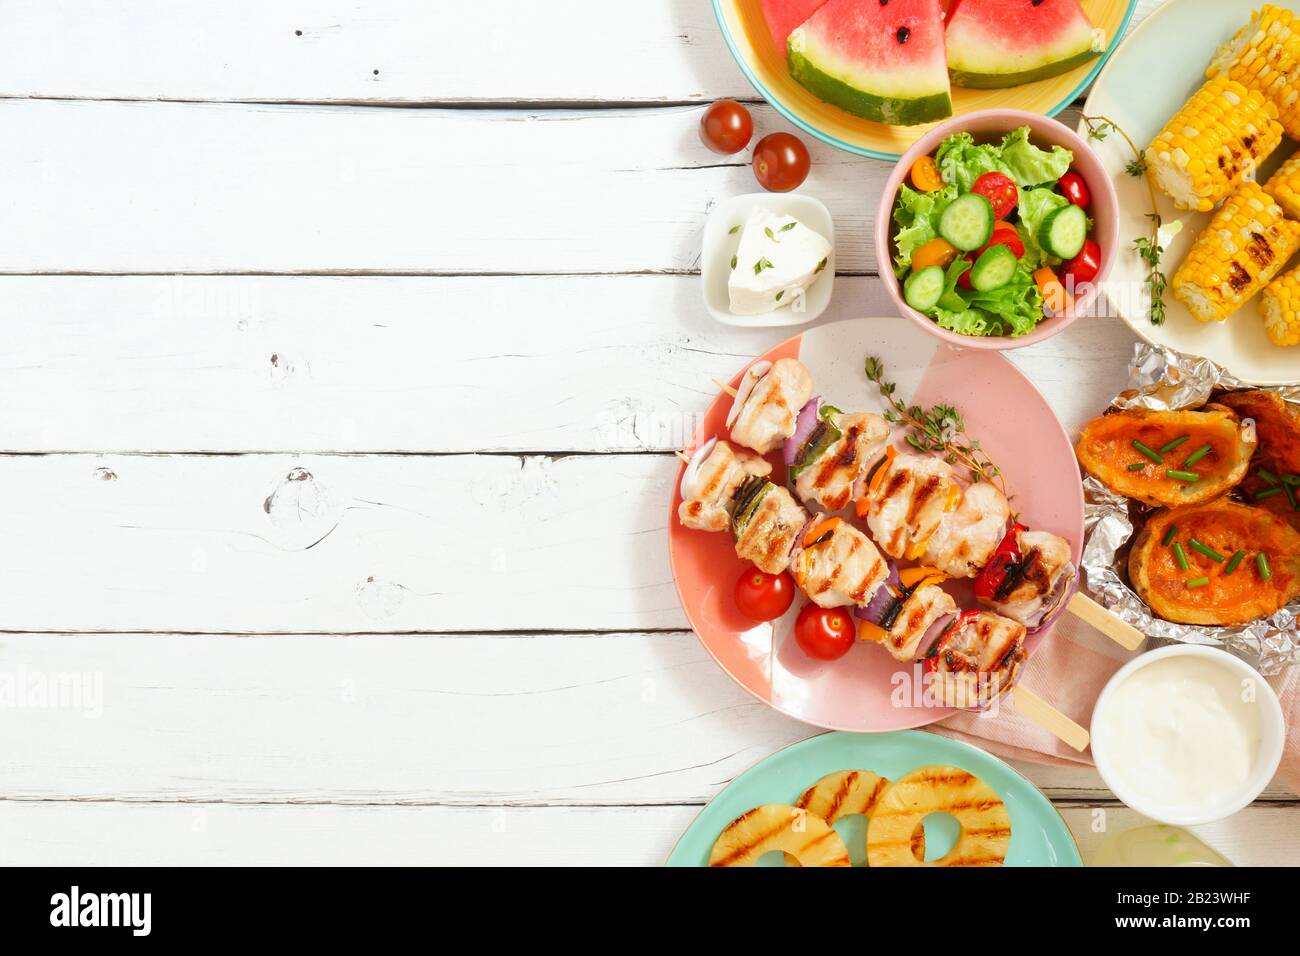 Summer BBQ or picnic food side border. Selection of grilled meat, fruits, salad and potatoes. Top view over a white wood background. Copy space. Stock Photo